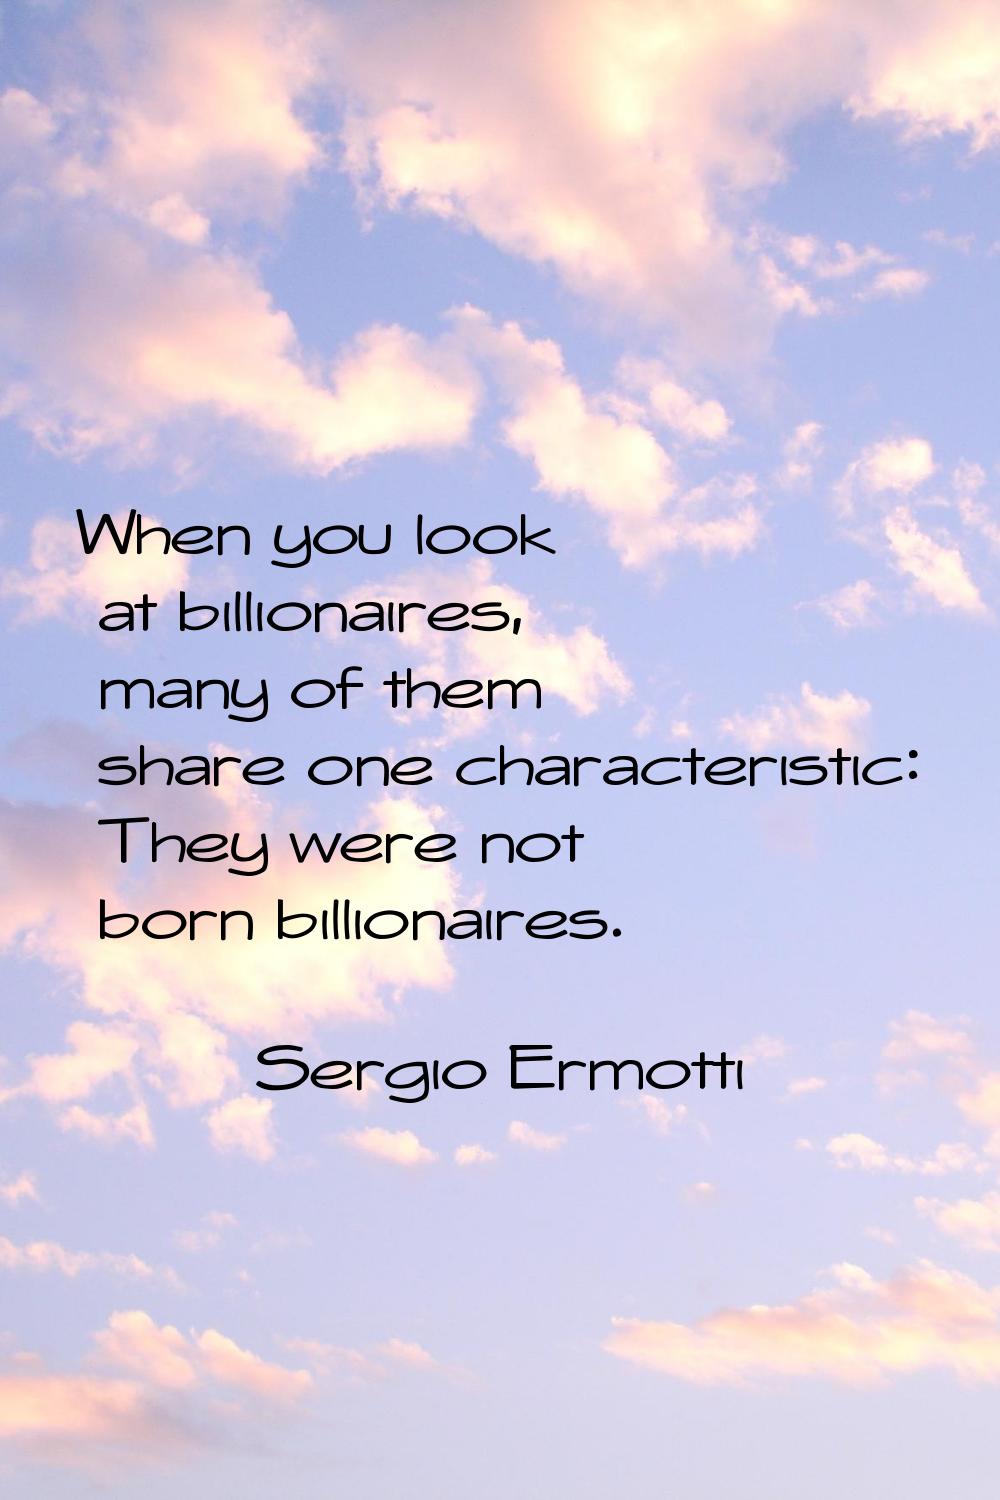 When you look at billionaires, many of them share one characteristic: They were not born billionair